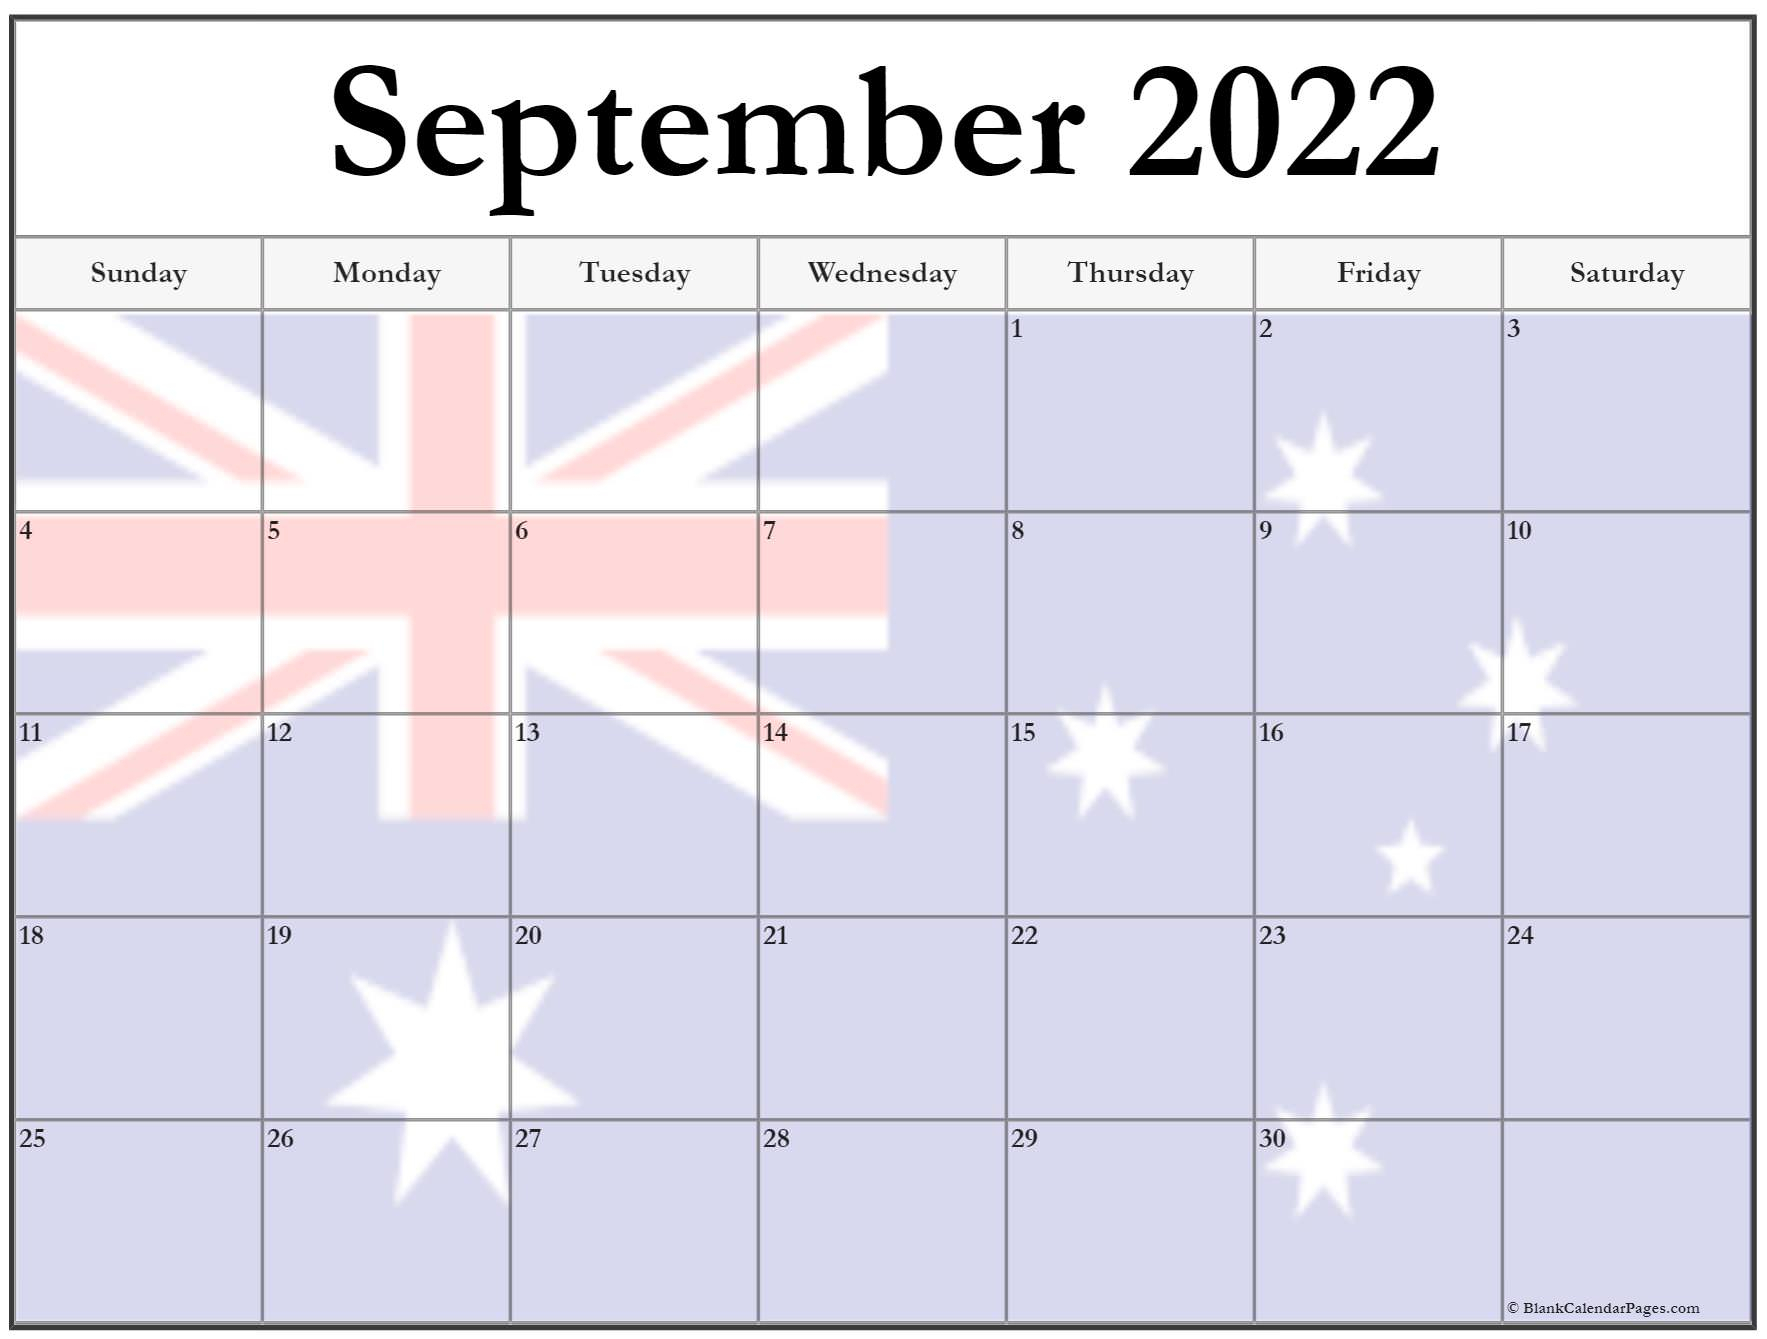 Collection Of September 2022 Photo Calendars With Image Filters. throughout Calendar 2022 Victoria Australia